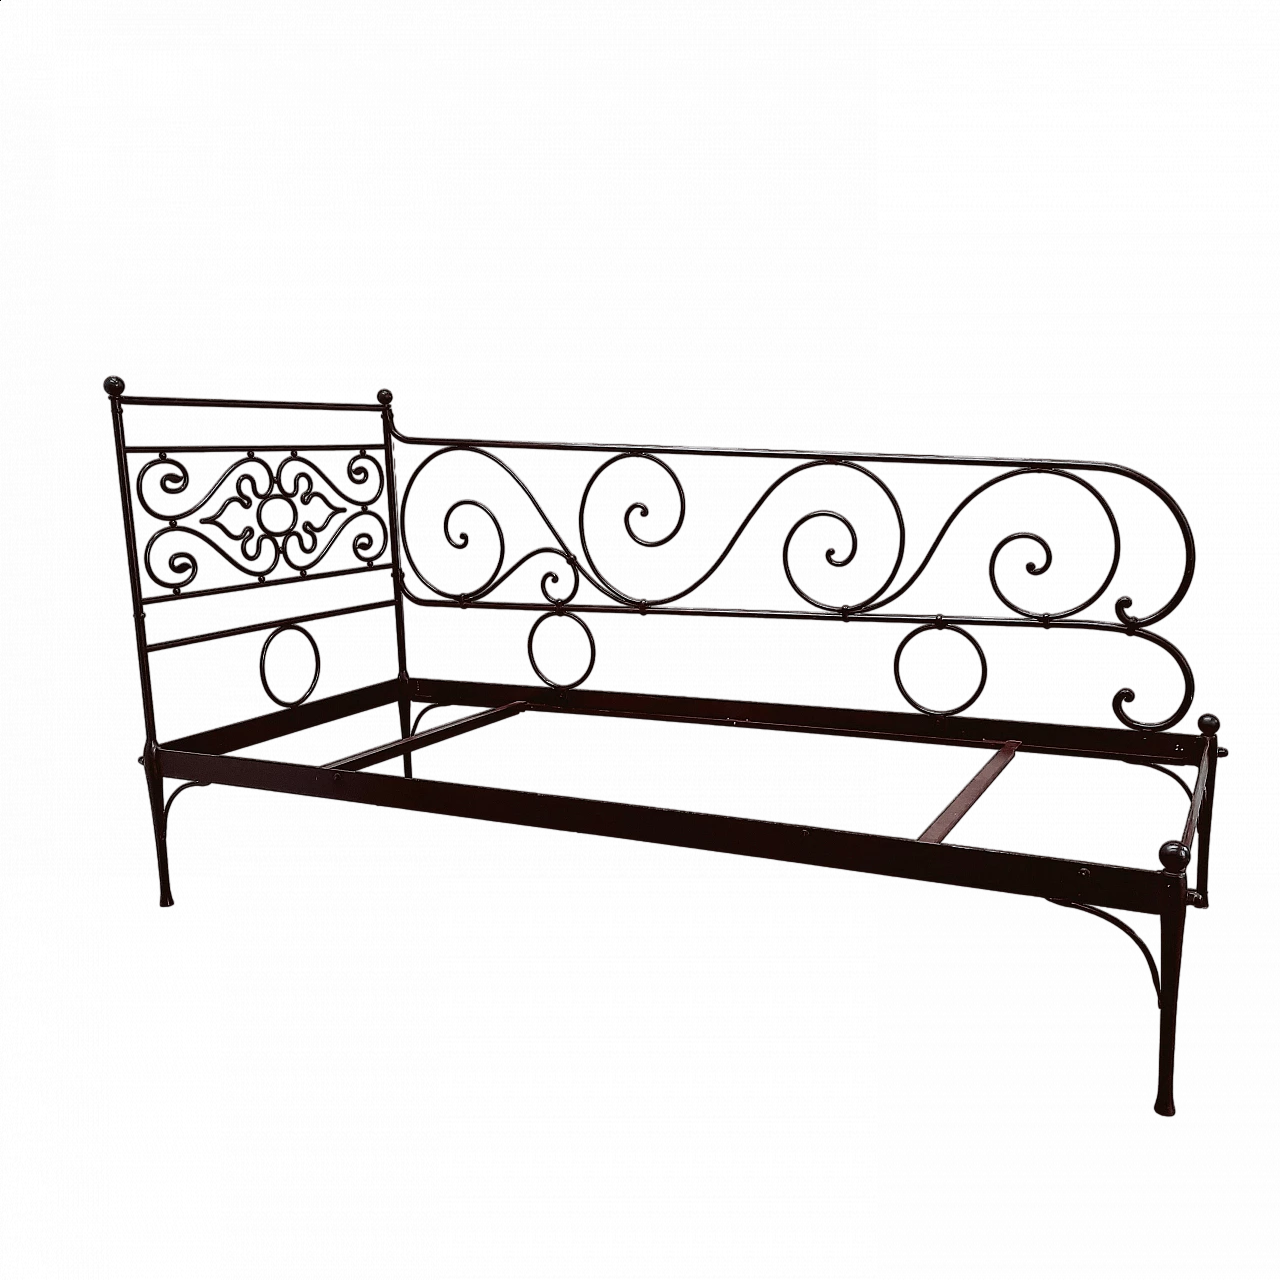 Wrought iron dormeuse bed, 19th century 8